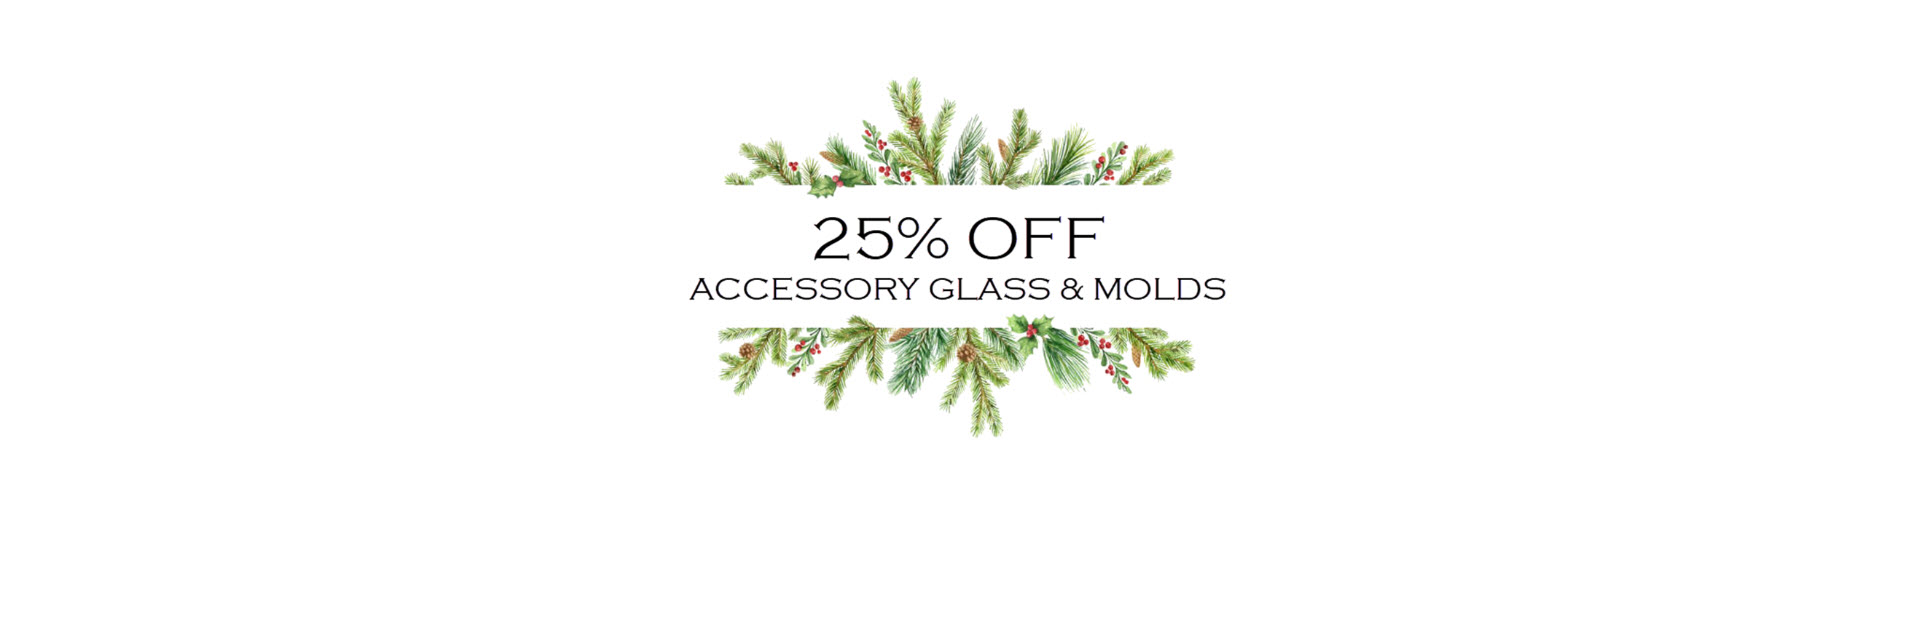 Accessory Glass & Molds Sale